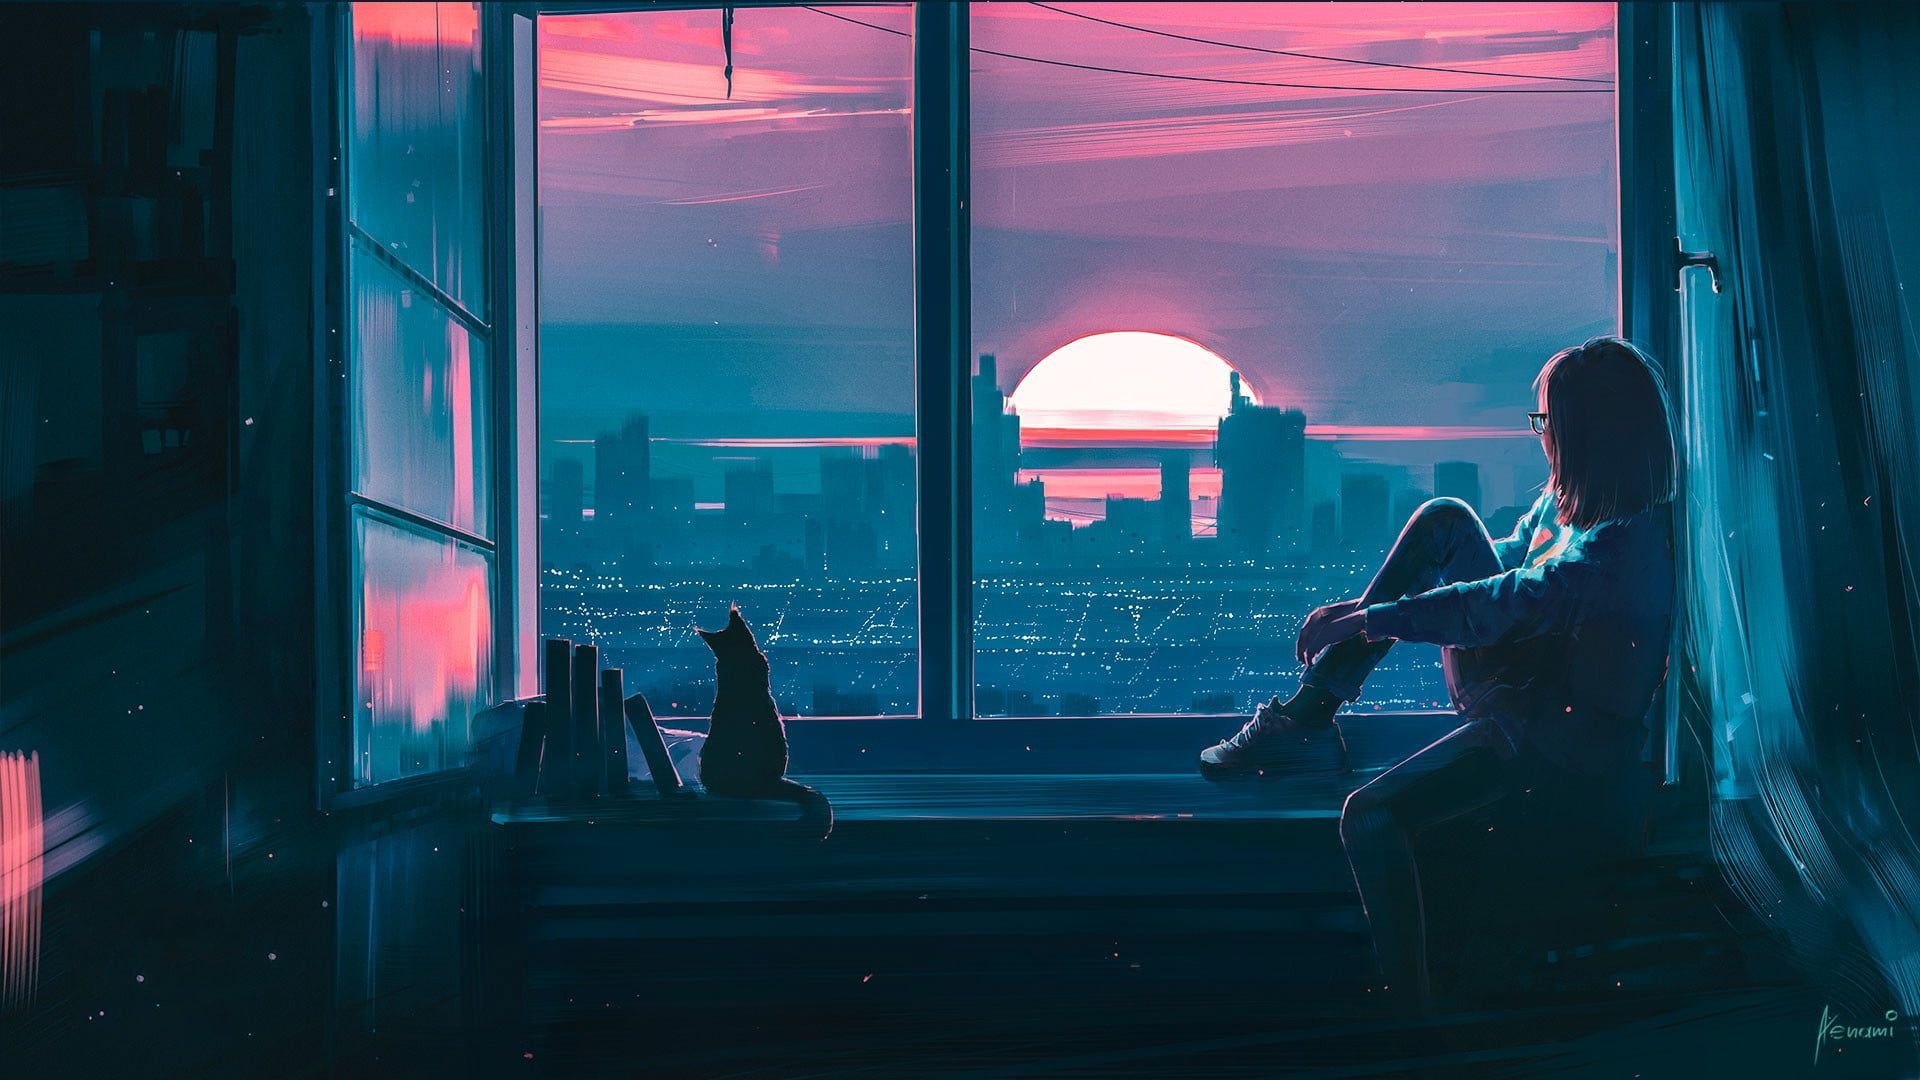 Sunset #Girl The city #Cat #View #Cat #Window #Fantasy #Landscape #Art #Sunset Concept Art #Characters Alena. Scenery wallpaper, Anime wallpaper, Chill wallpaper